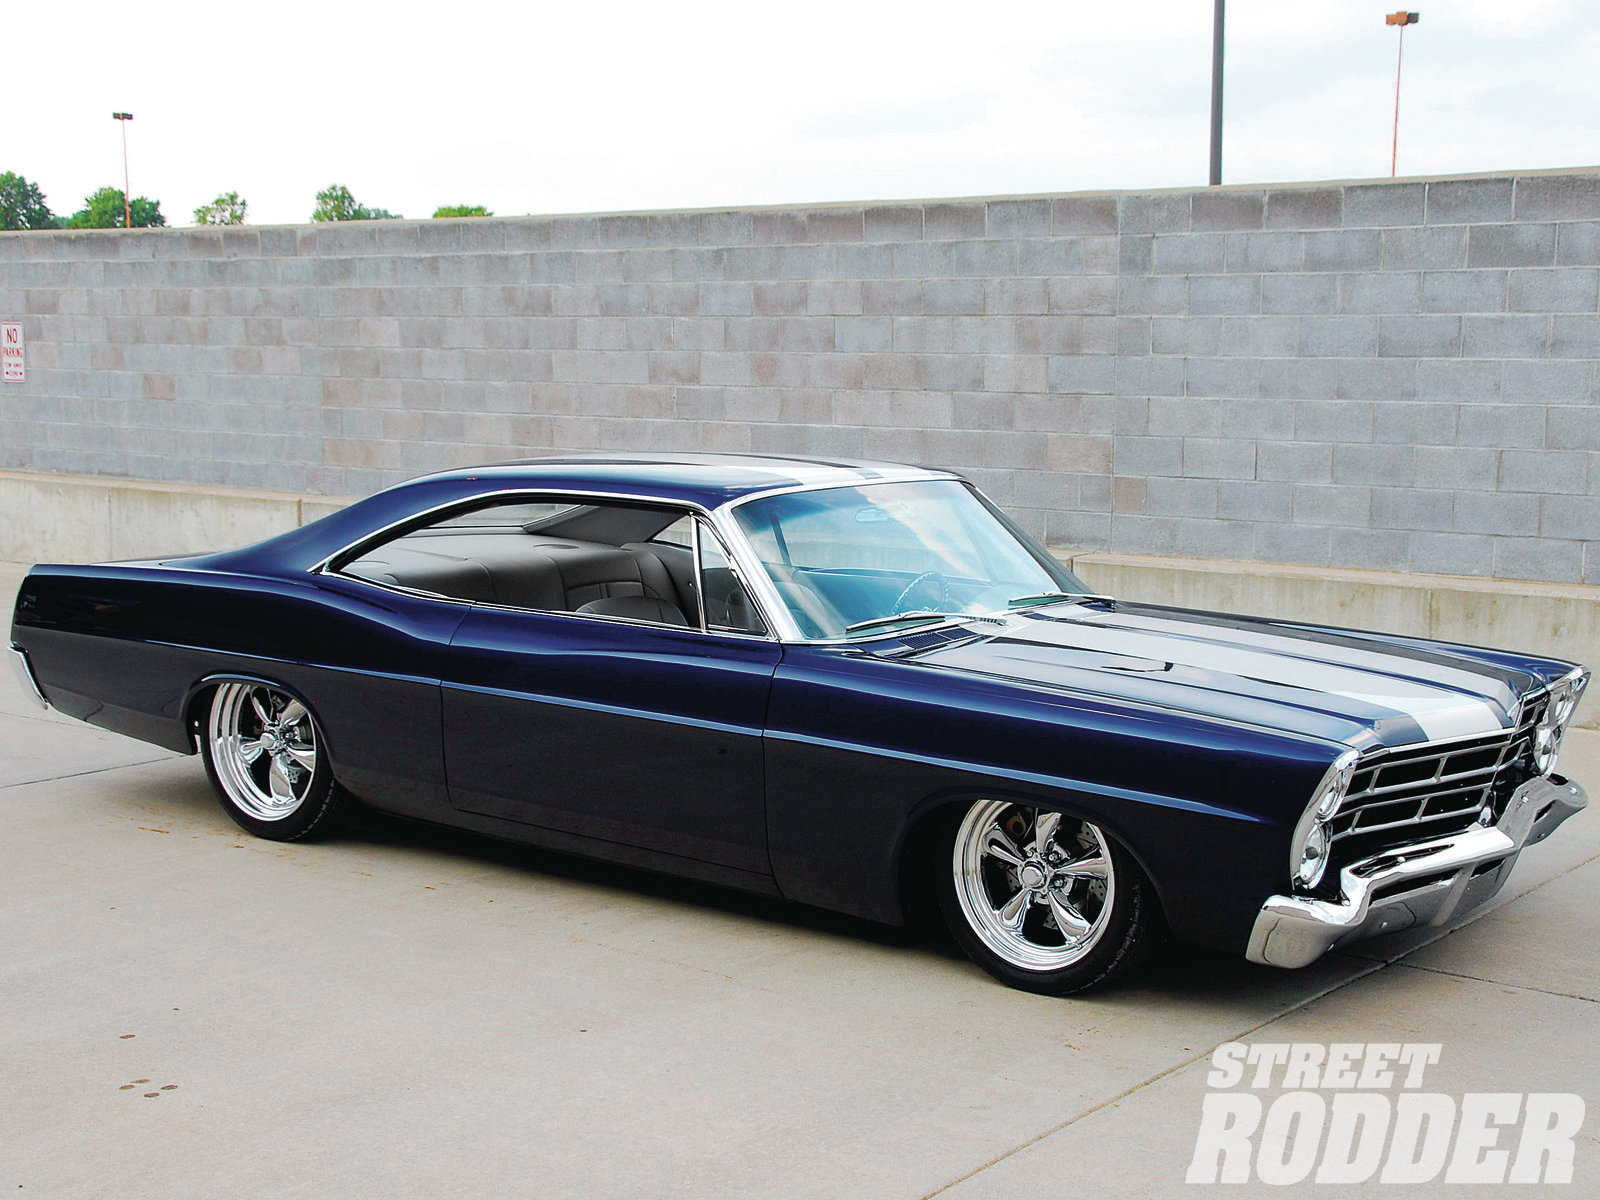 Ford Galaxie 500 Pics, Vehicles Collection - 1967 Ford Galaxie 500 Blue - HD Wallpaper 